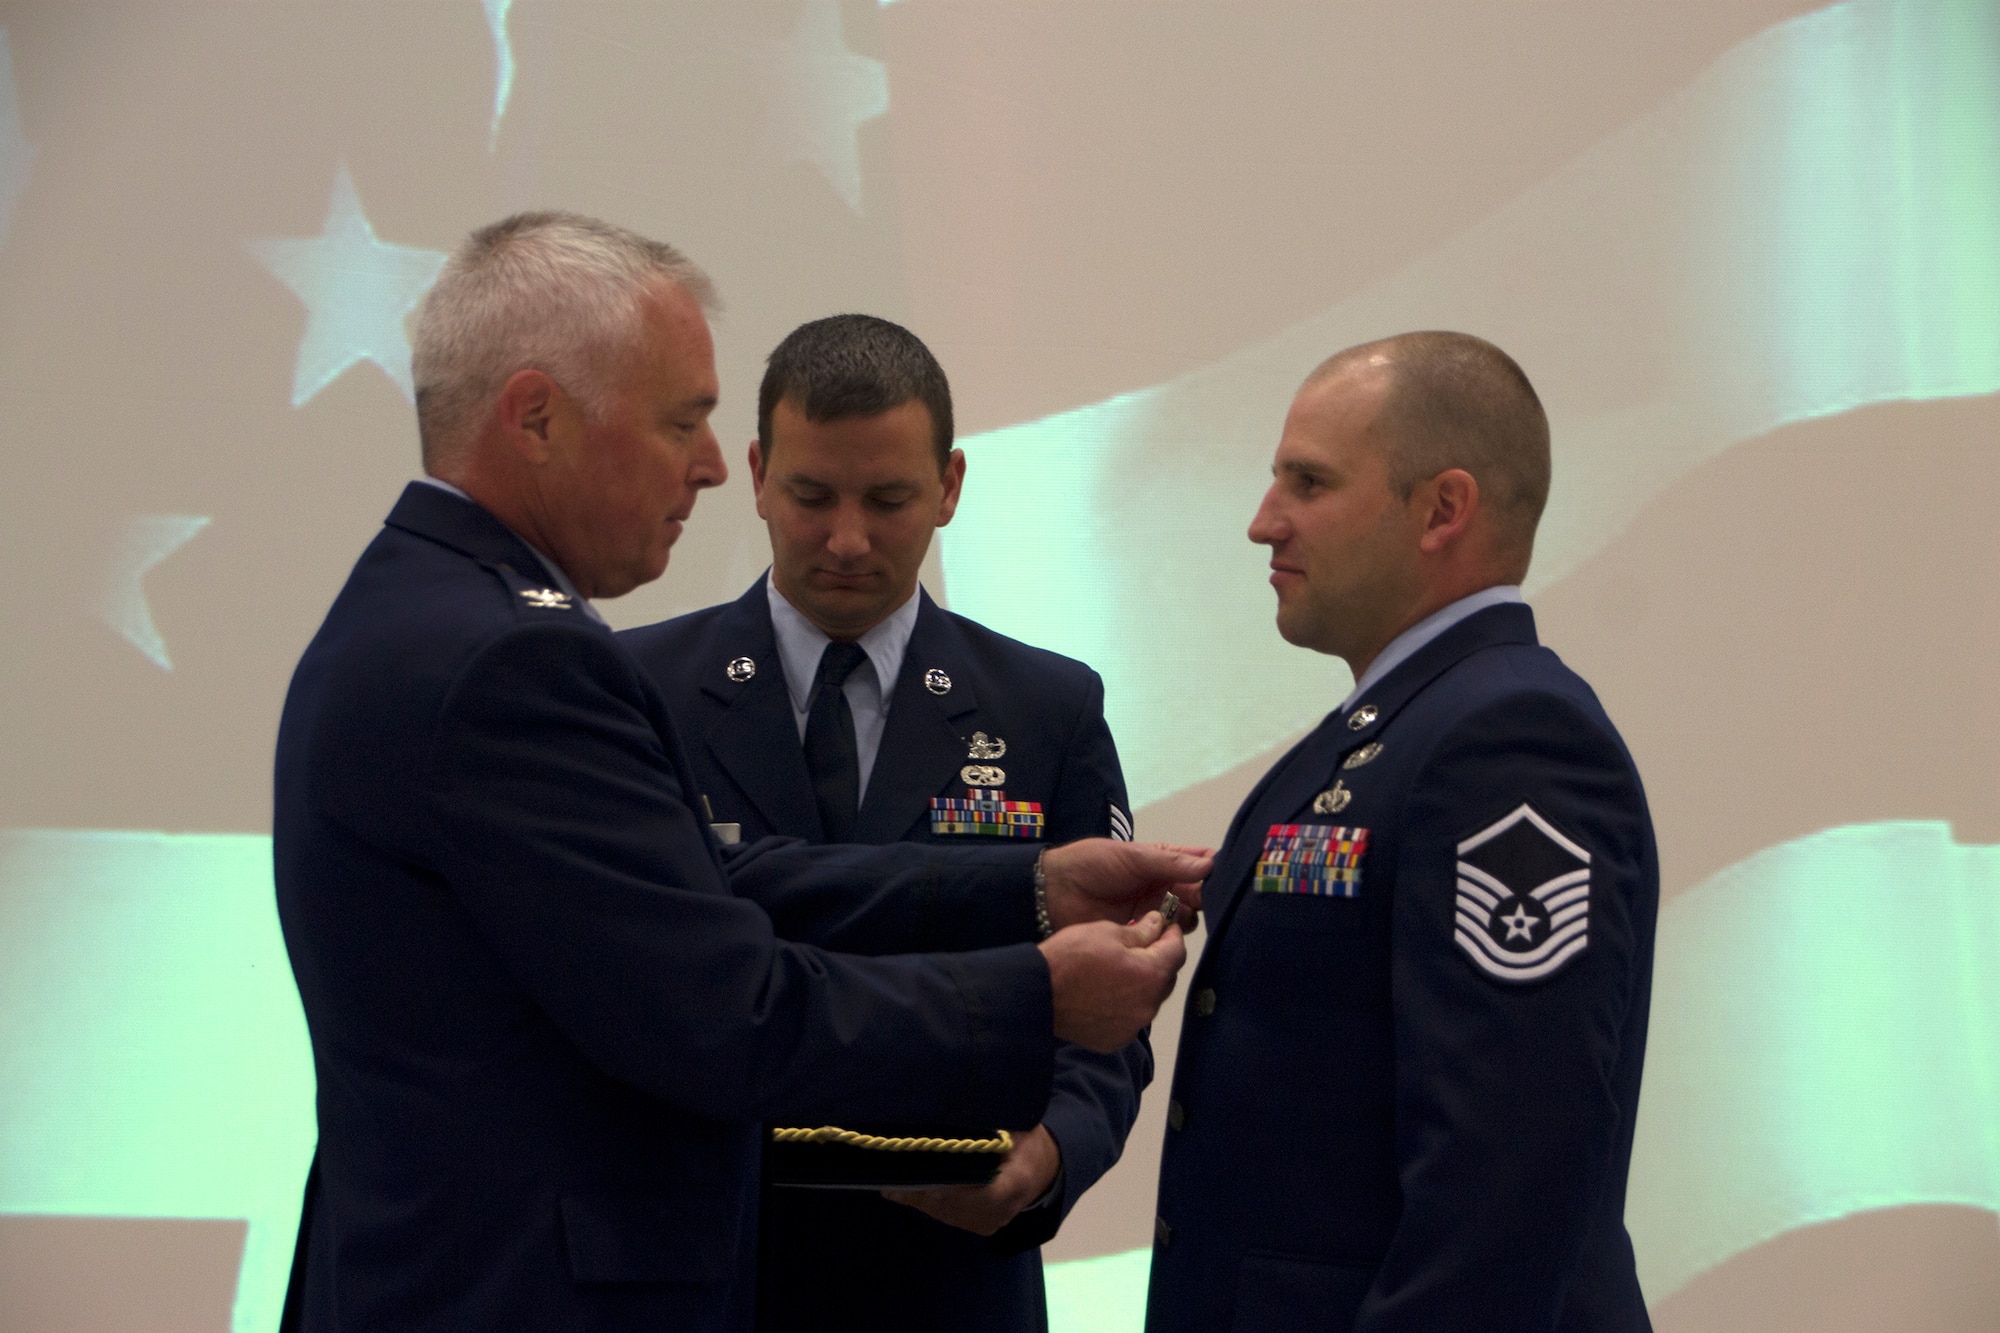 Col. Scott McLaughlin (left), 446th Airlift Wing commander presenting Master Sgt. Shawn Lundgren, 446th Civil Engineer Squadron, explosive ordnance disposal technician, with the Bronze Star Medal, Oct. 5, 2014. Lundgren earned the award for his actions while serving in Afghanistan, October 2013 to May 2014. (U.S. Air Force Reserve photo by Staff Sgt. Bryan Hull)